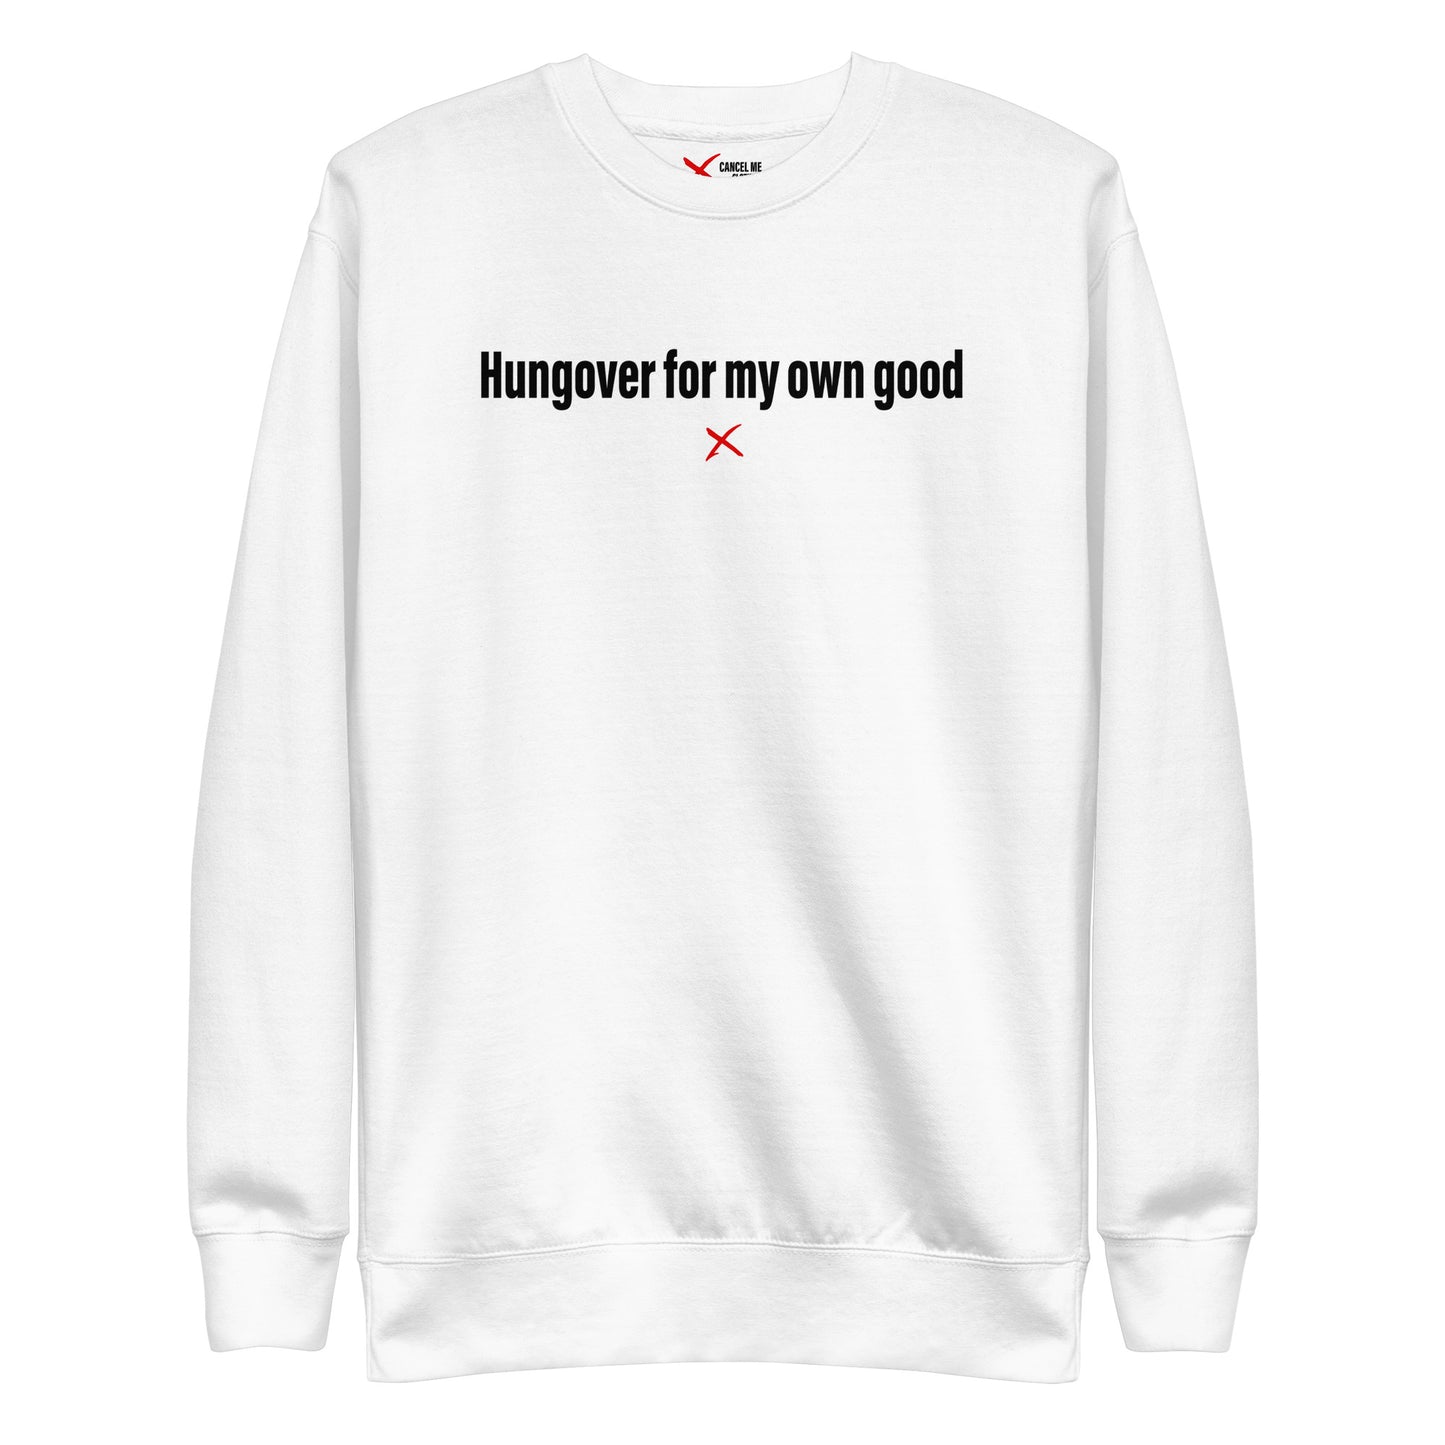 Hungover for my own good - Sweatshirt